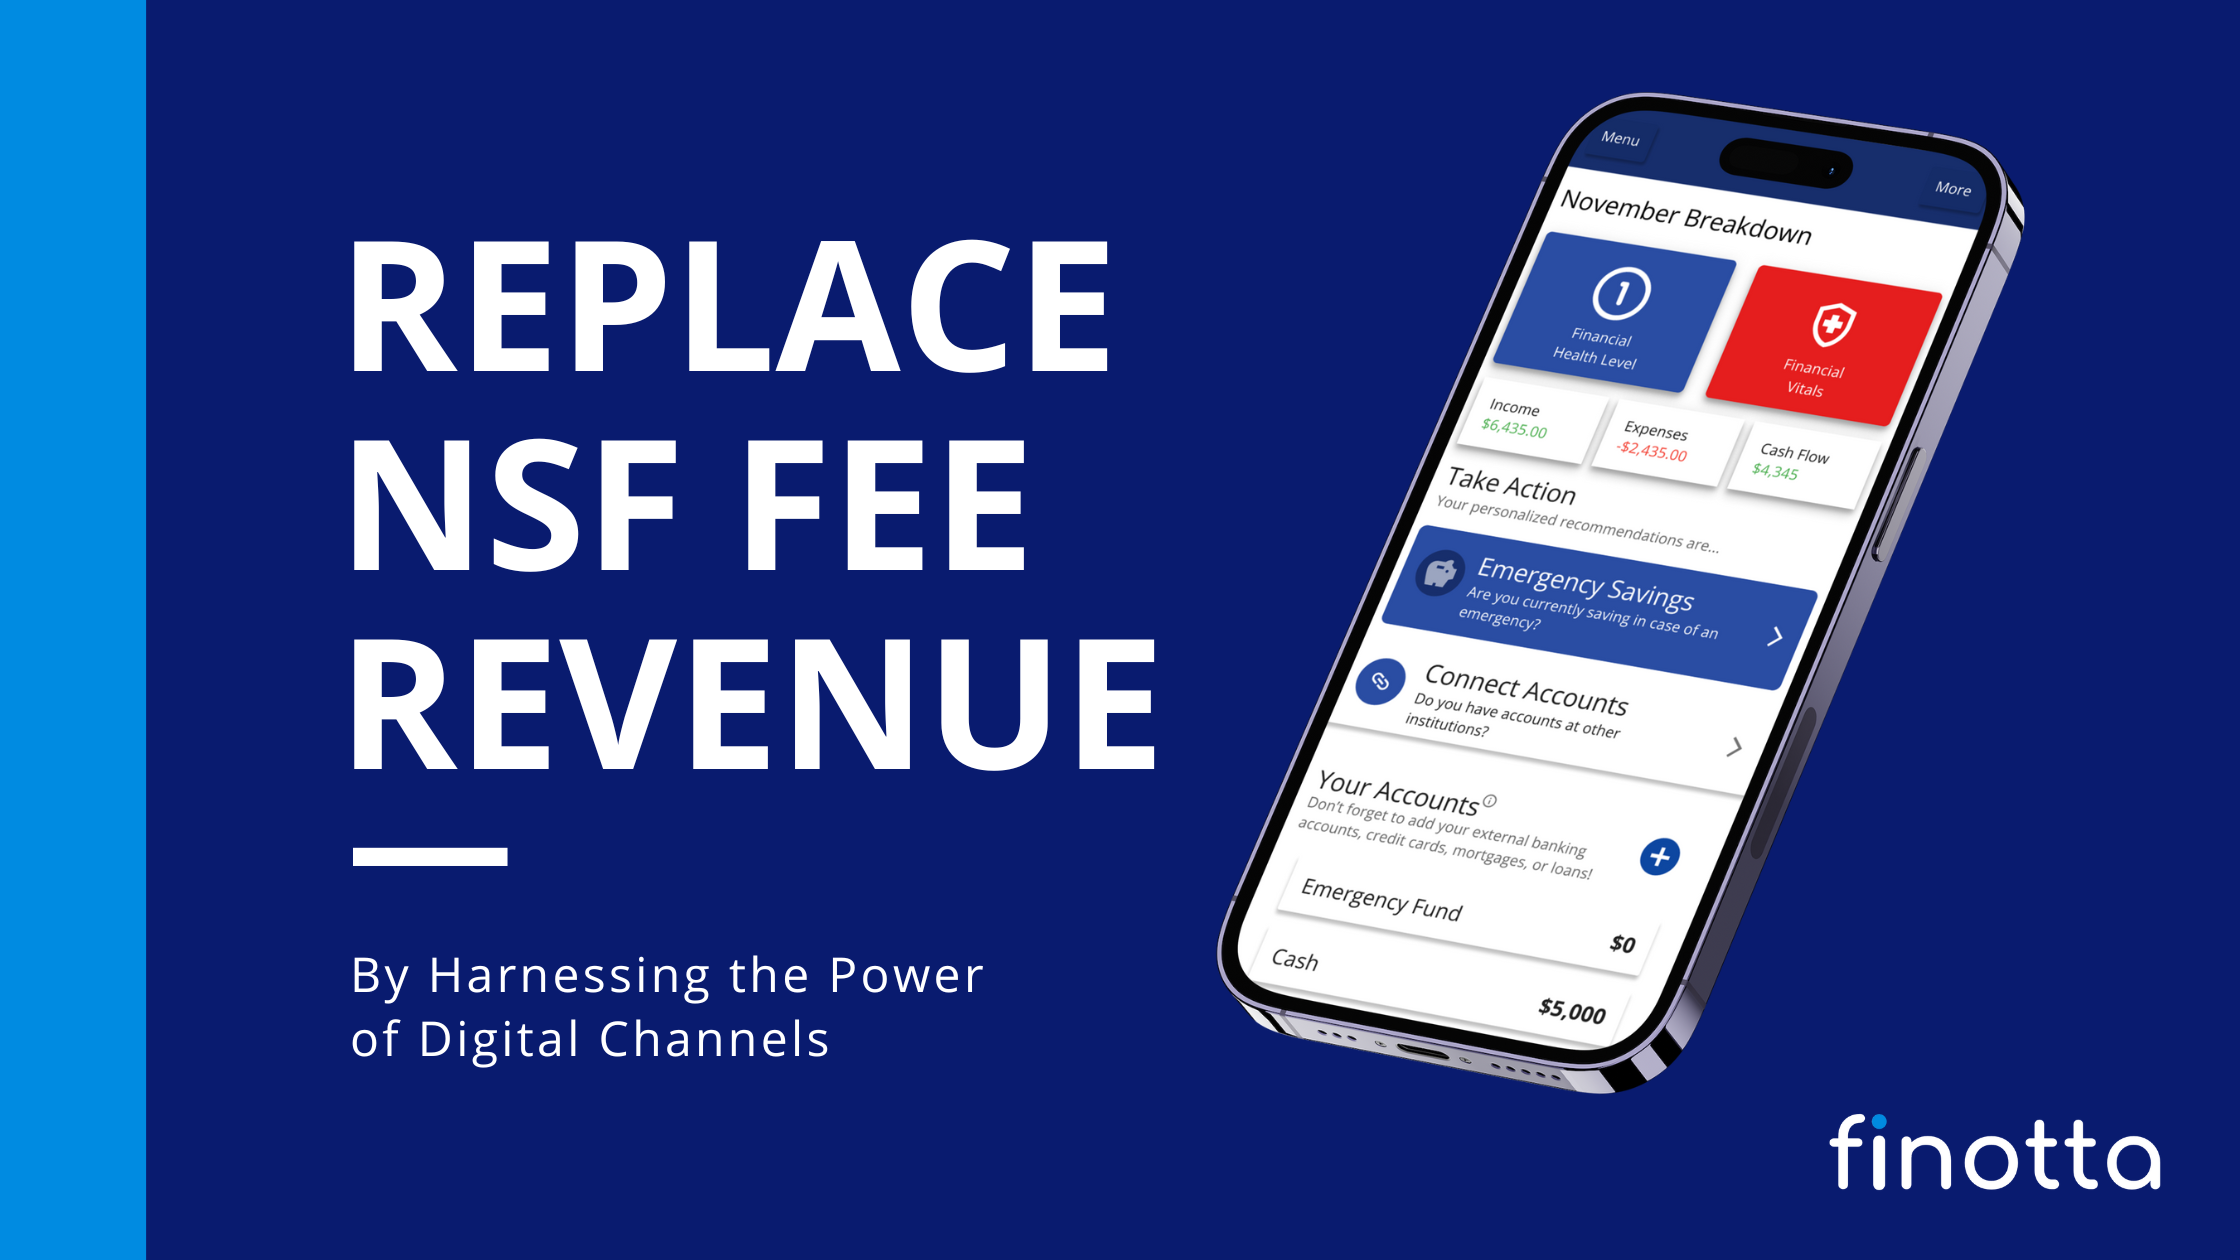 Replace NSF Fee Revenue by Harnessing the Power of Digital Channels